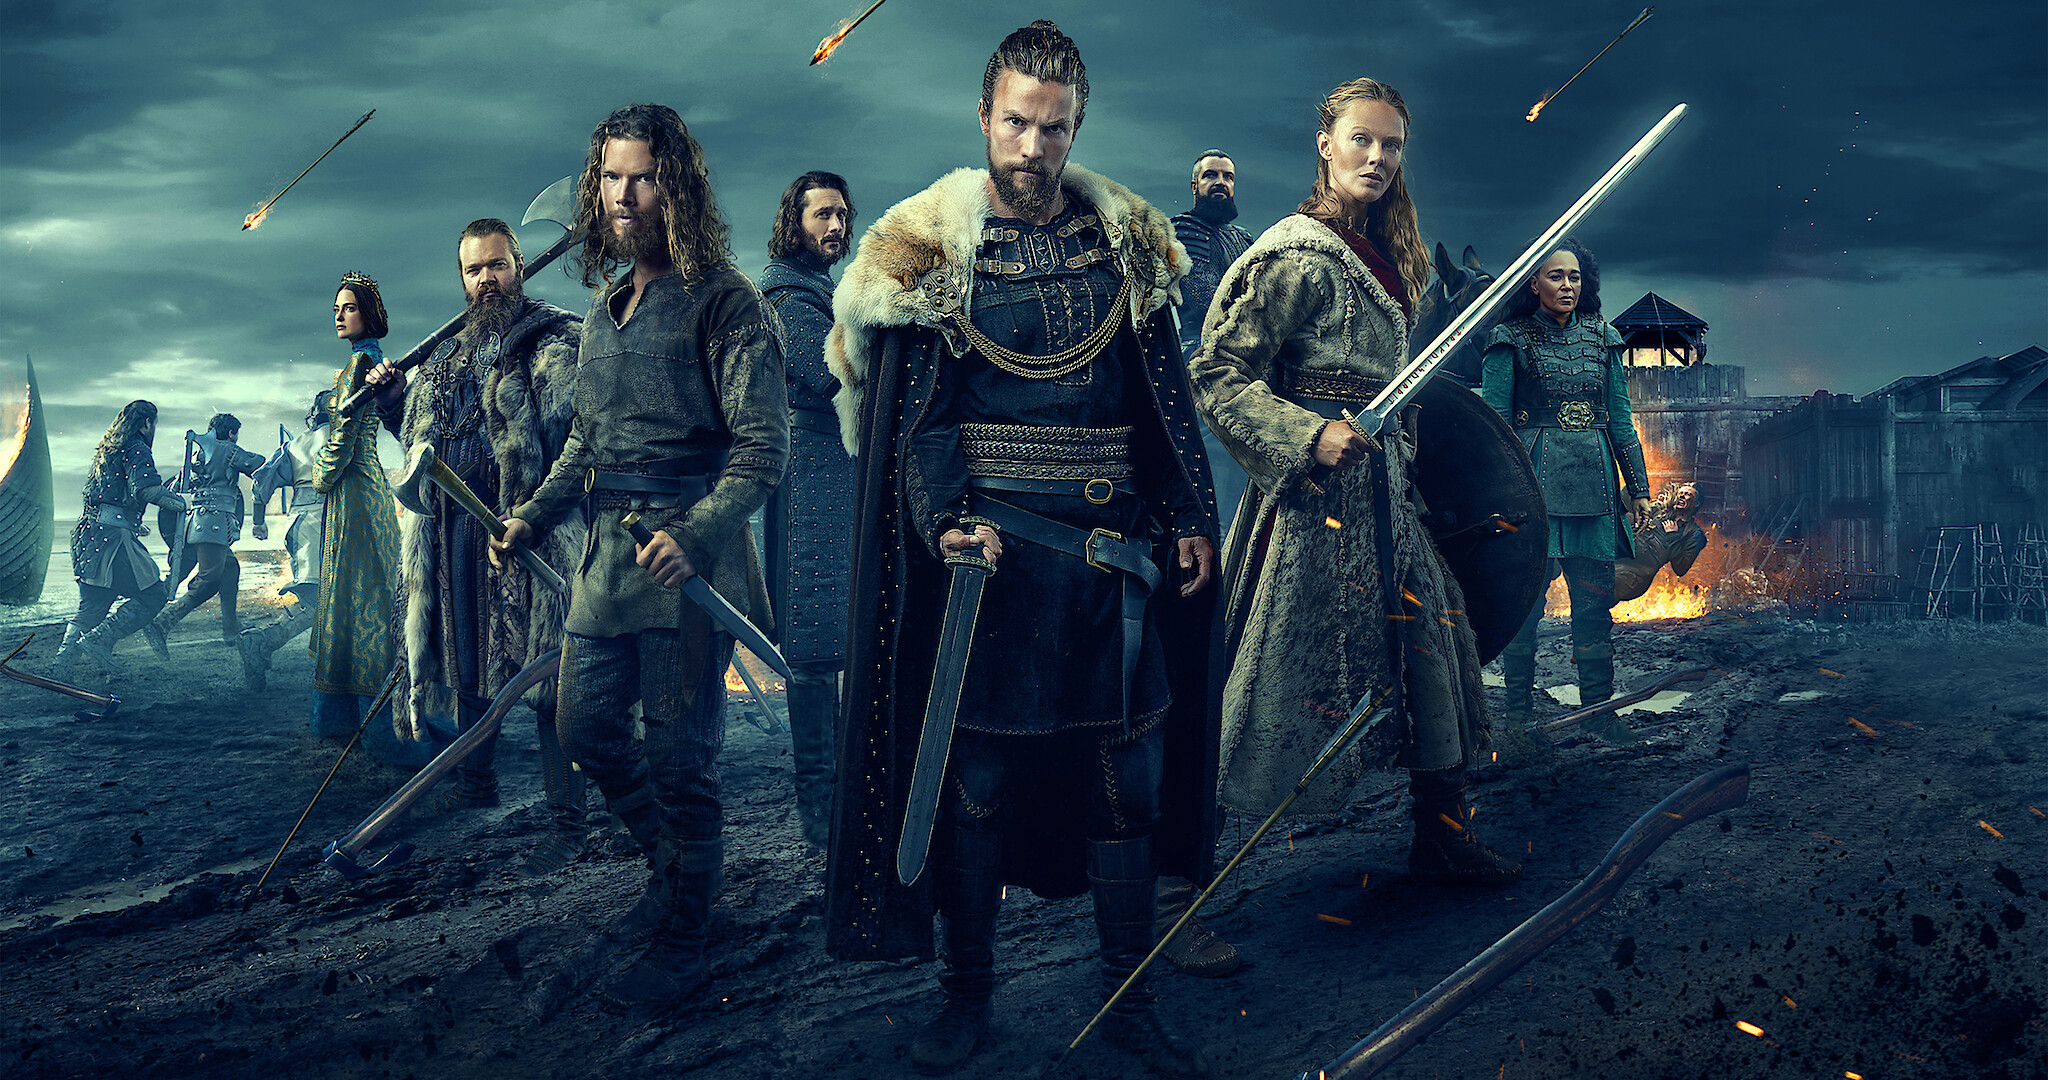 Is 'Vikings: Valhalla' Based on Real Events? Yes (and No